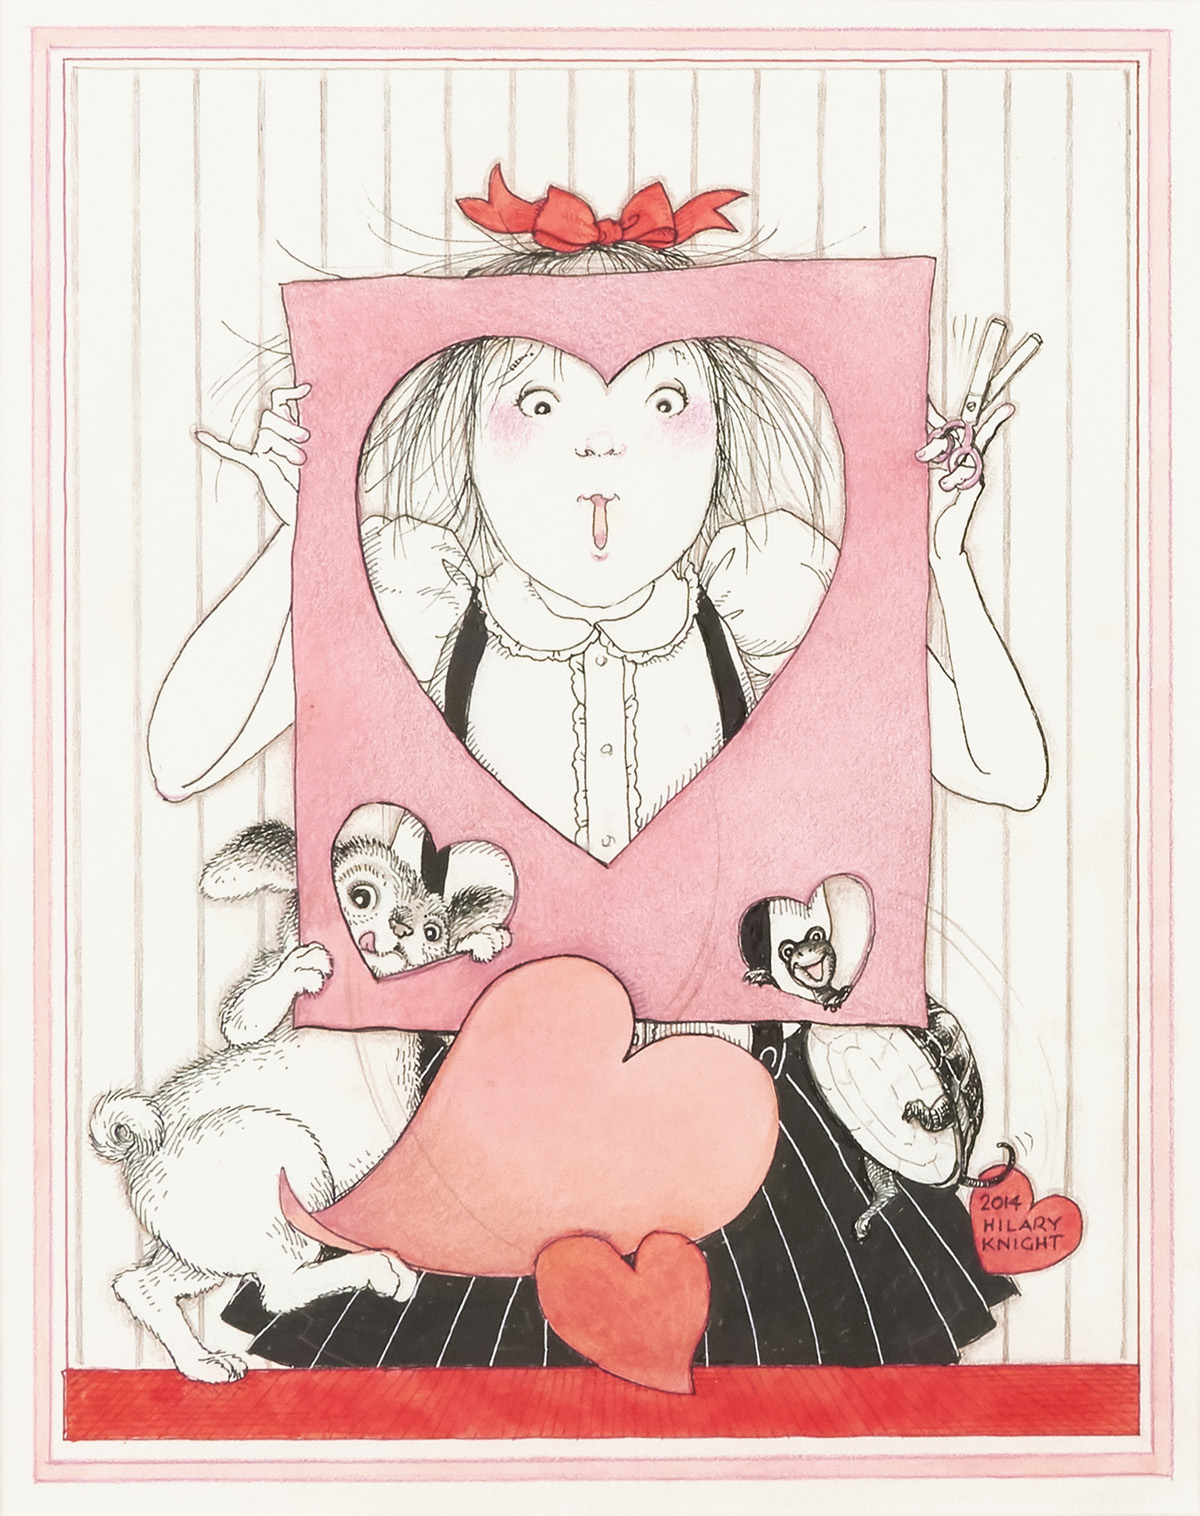 HILARY KNIGHT. Eloise with Valentine. [CHILDRENS / HOLIDAYS]